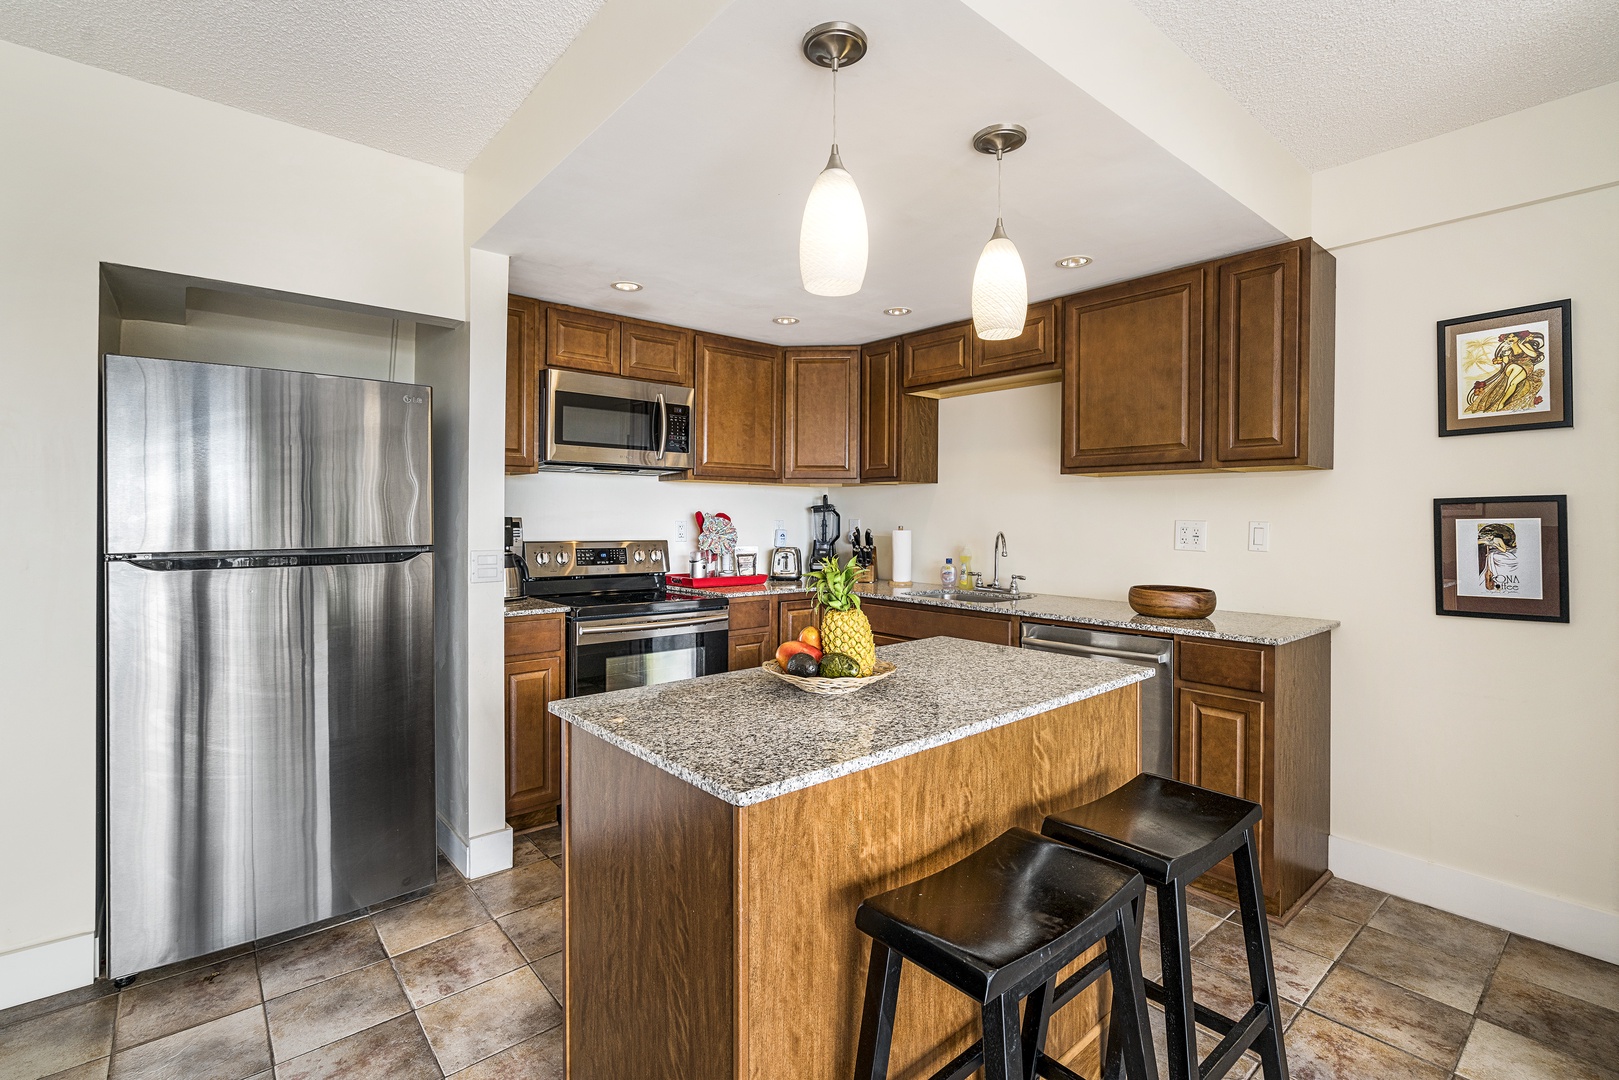 Kailua Kona Vacation Rentals, Kona Plaza 201 - Upgraded appliances in the spacious fully equipped kitchen!